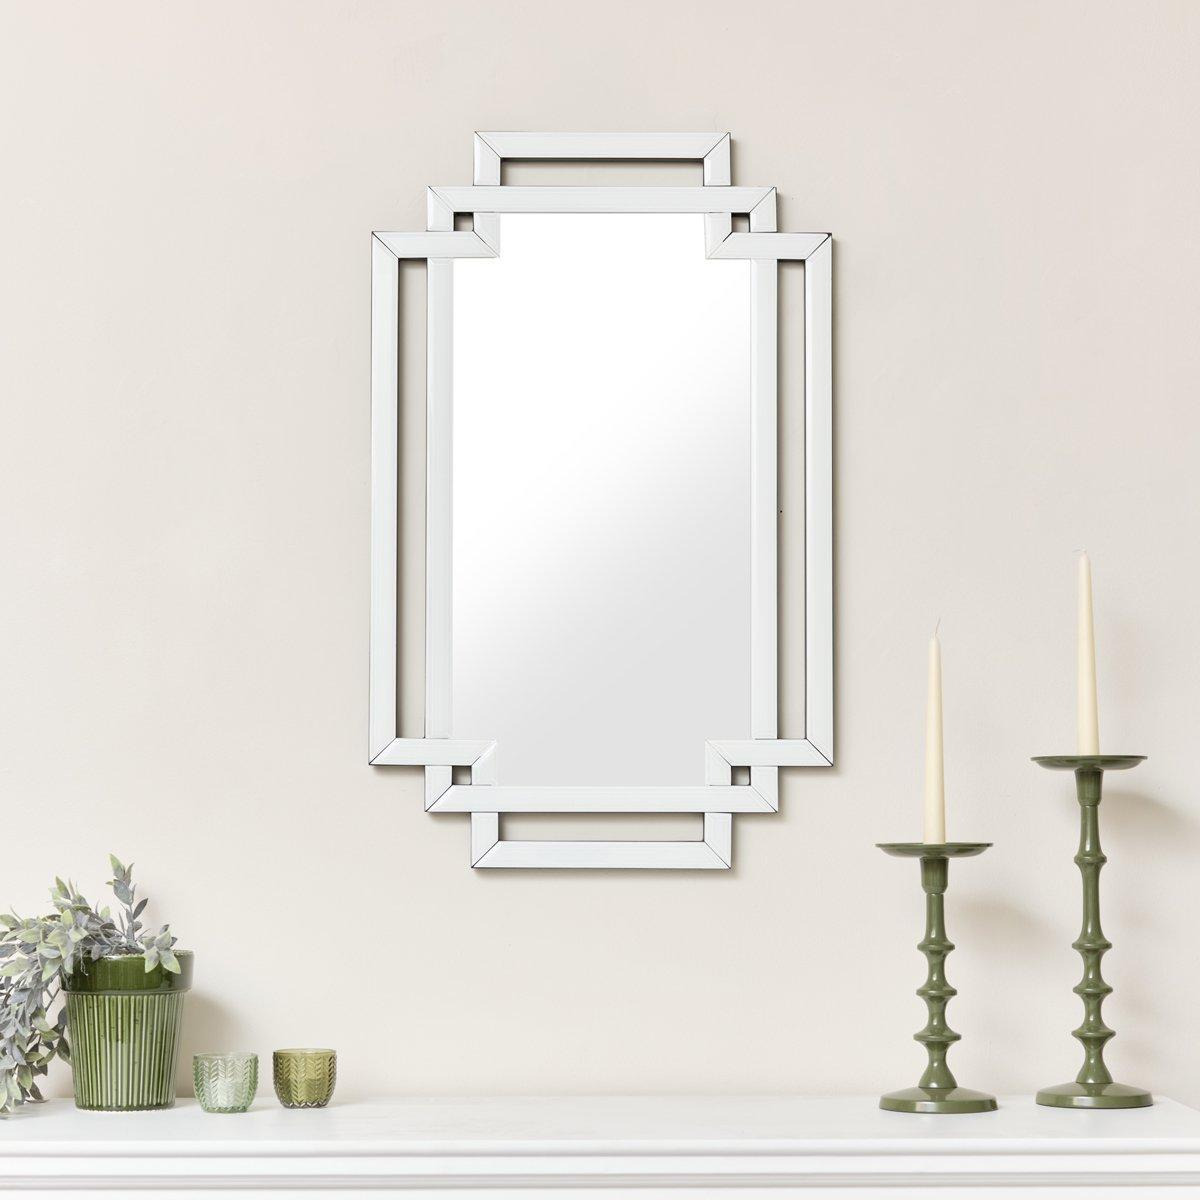 Art Deco White Glass Wall Mirror With Mirrored Accents - 80cm X 50cm - image 1